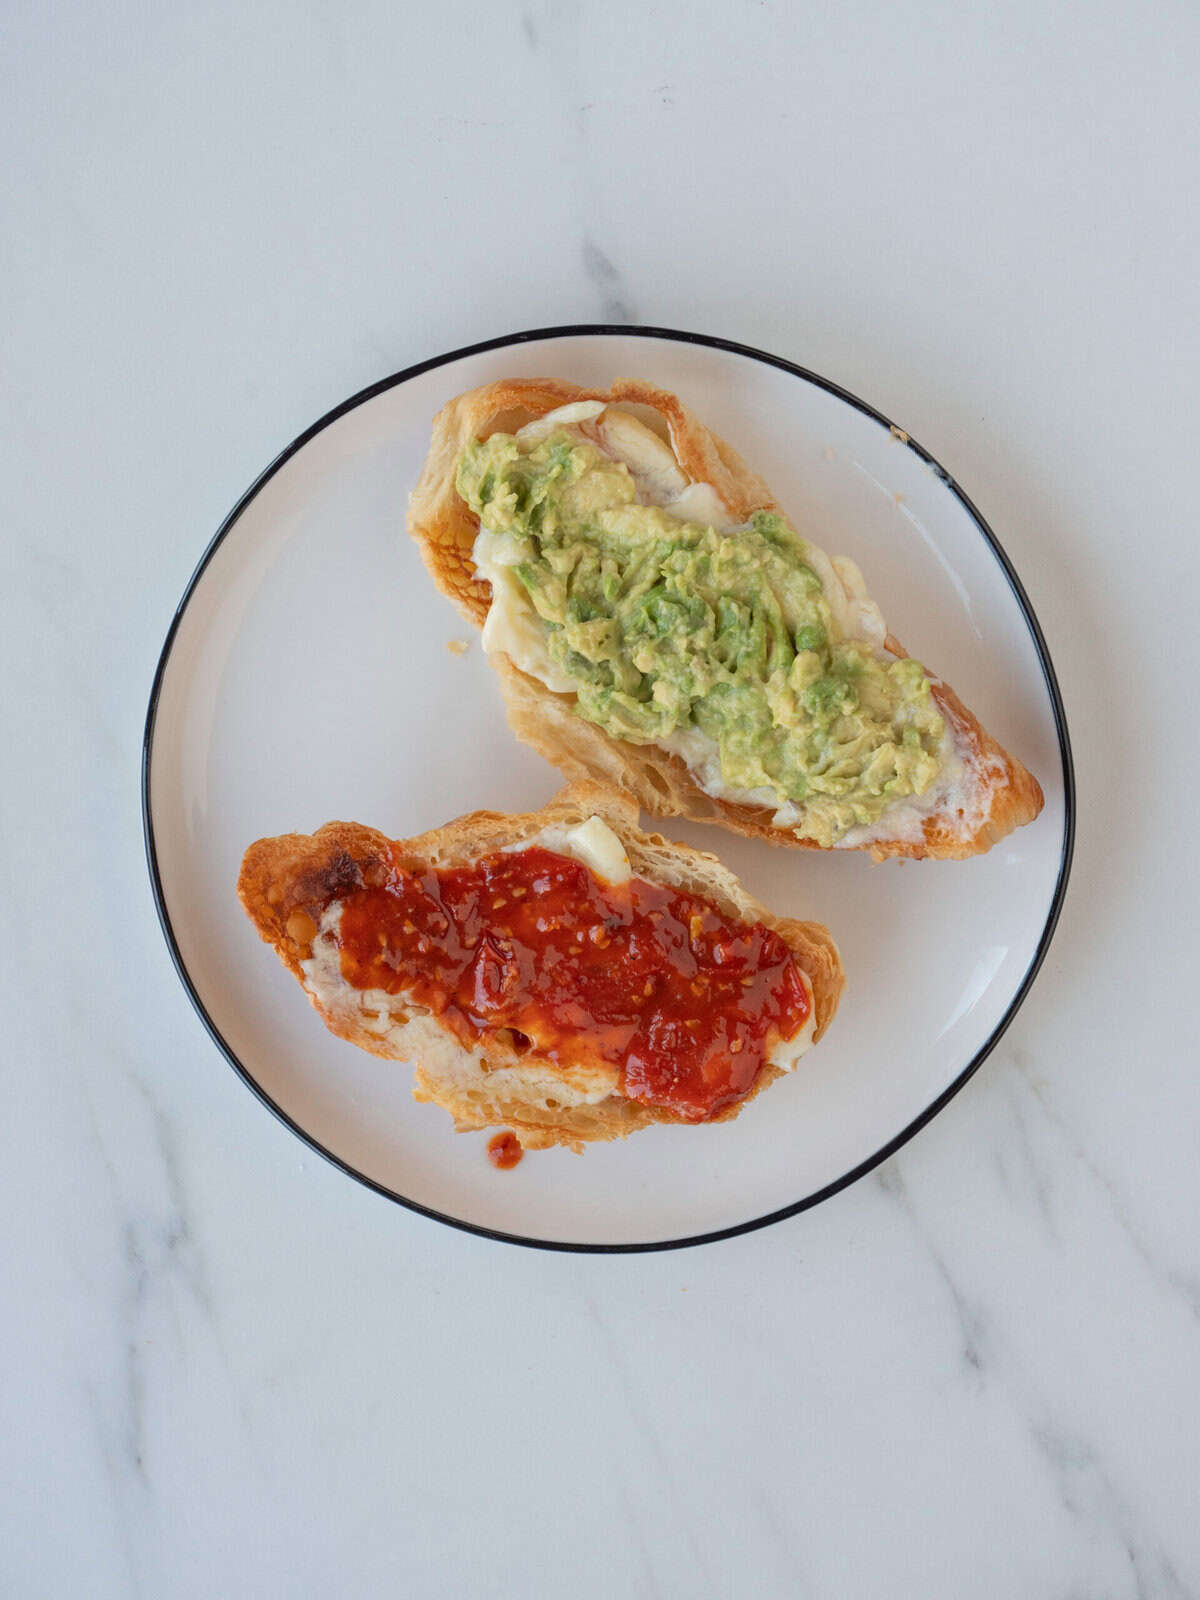 A plate with two toasted halves of a croissant, one with mayonnaise and tomato jam spread, and the other half spread with mayonnaise and smashed avocado.